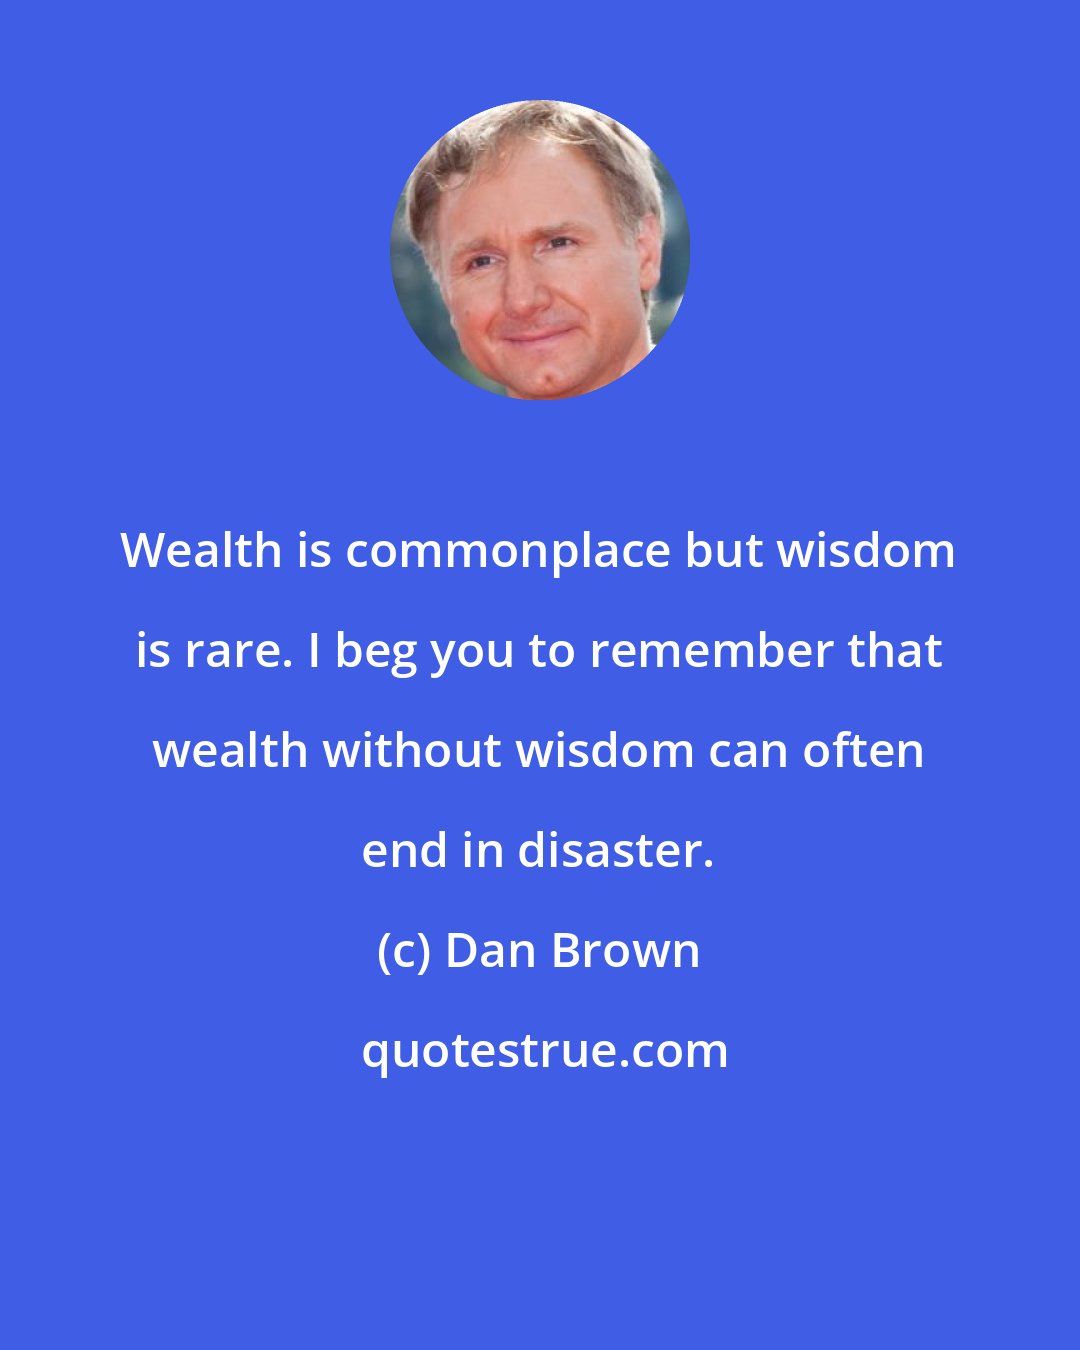 Dan Brown: Wealth is commonplace but wisdom is rare. I beg you to remember that wealth without wisdom can often end in disaster.